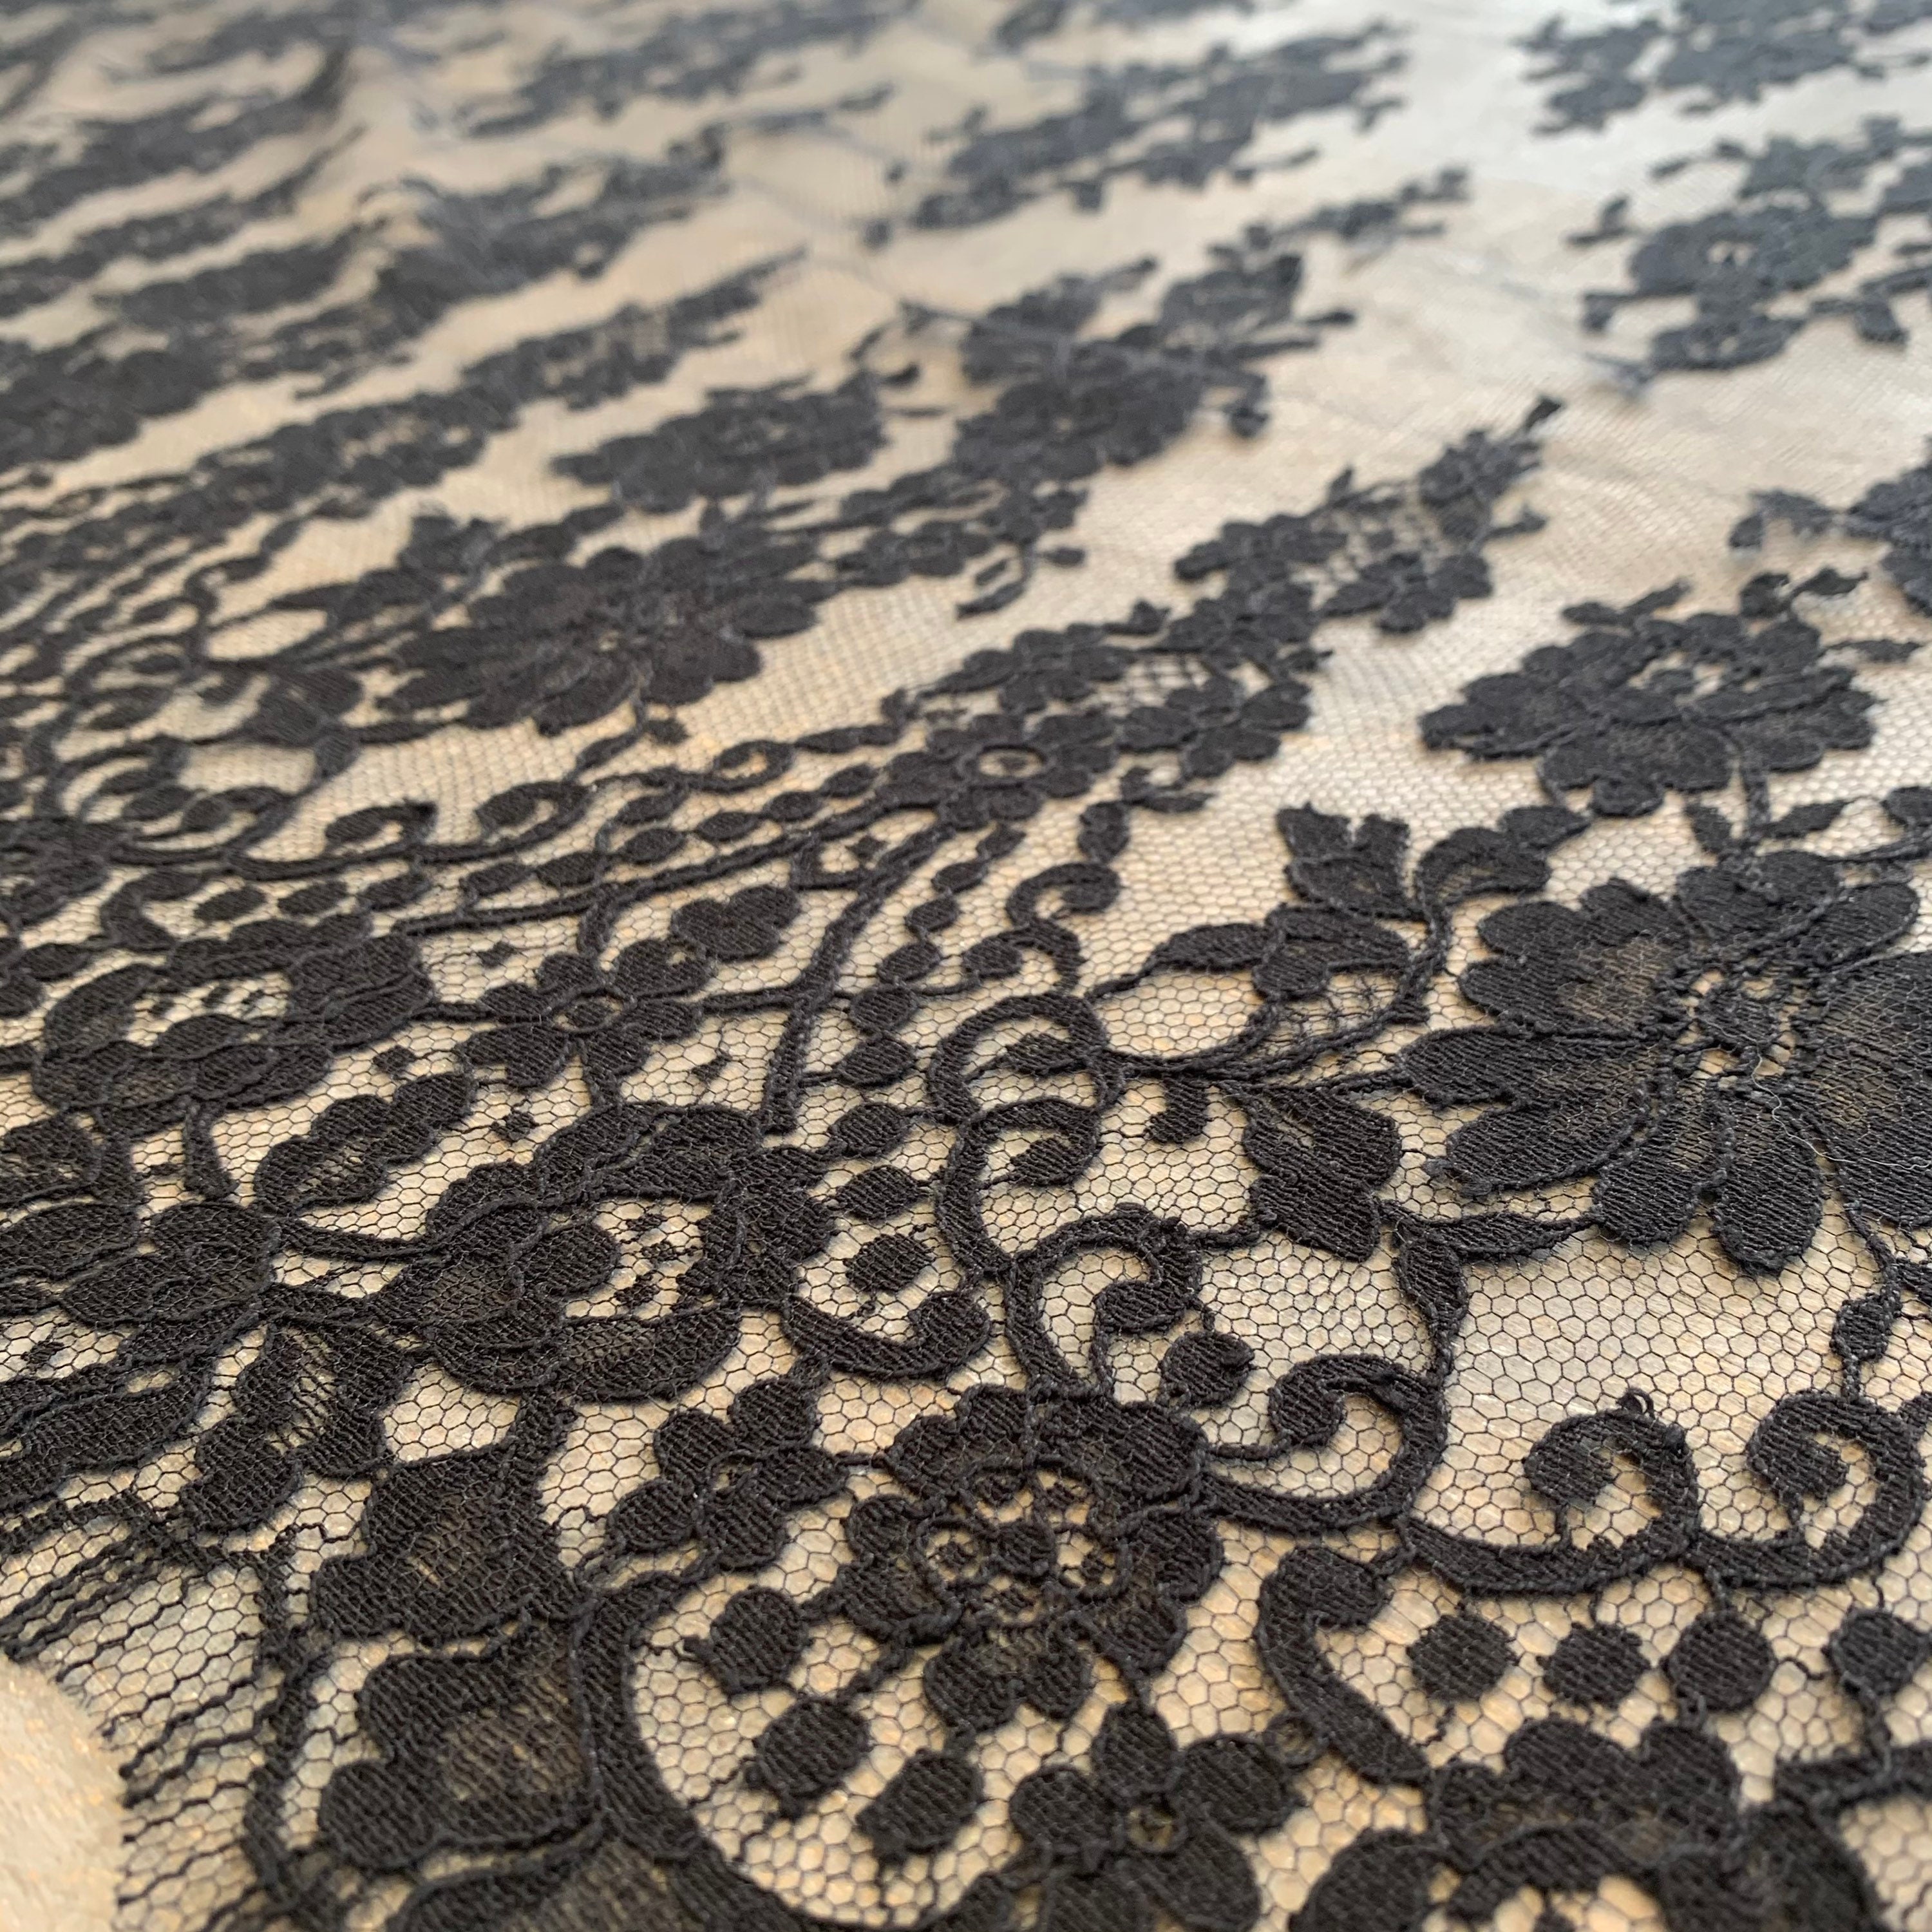 French Leavers Lace Fabric LOUISE Haute Couture 90cm Black or Blue Calais  Lace -  Israel